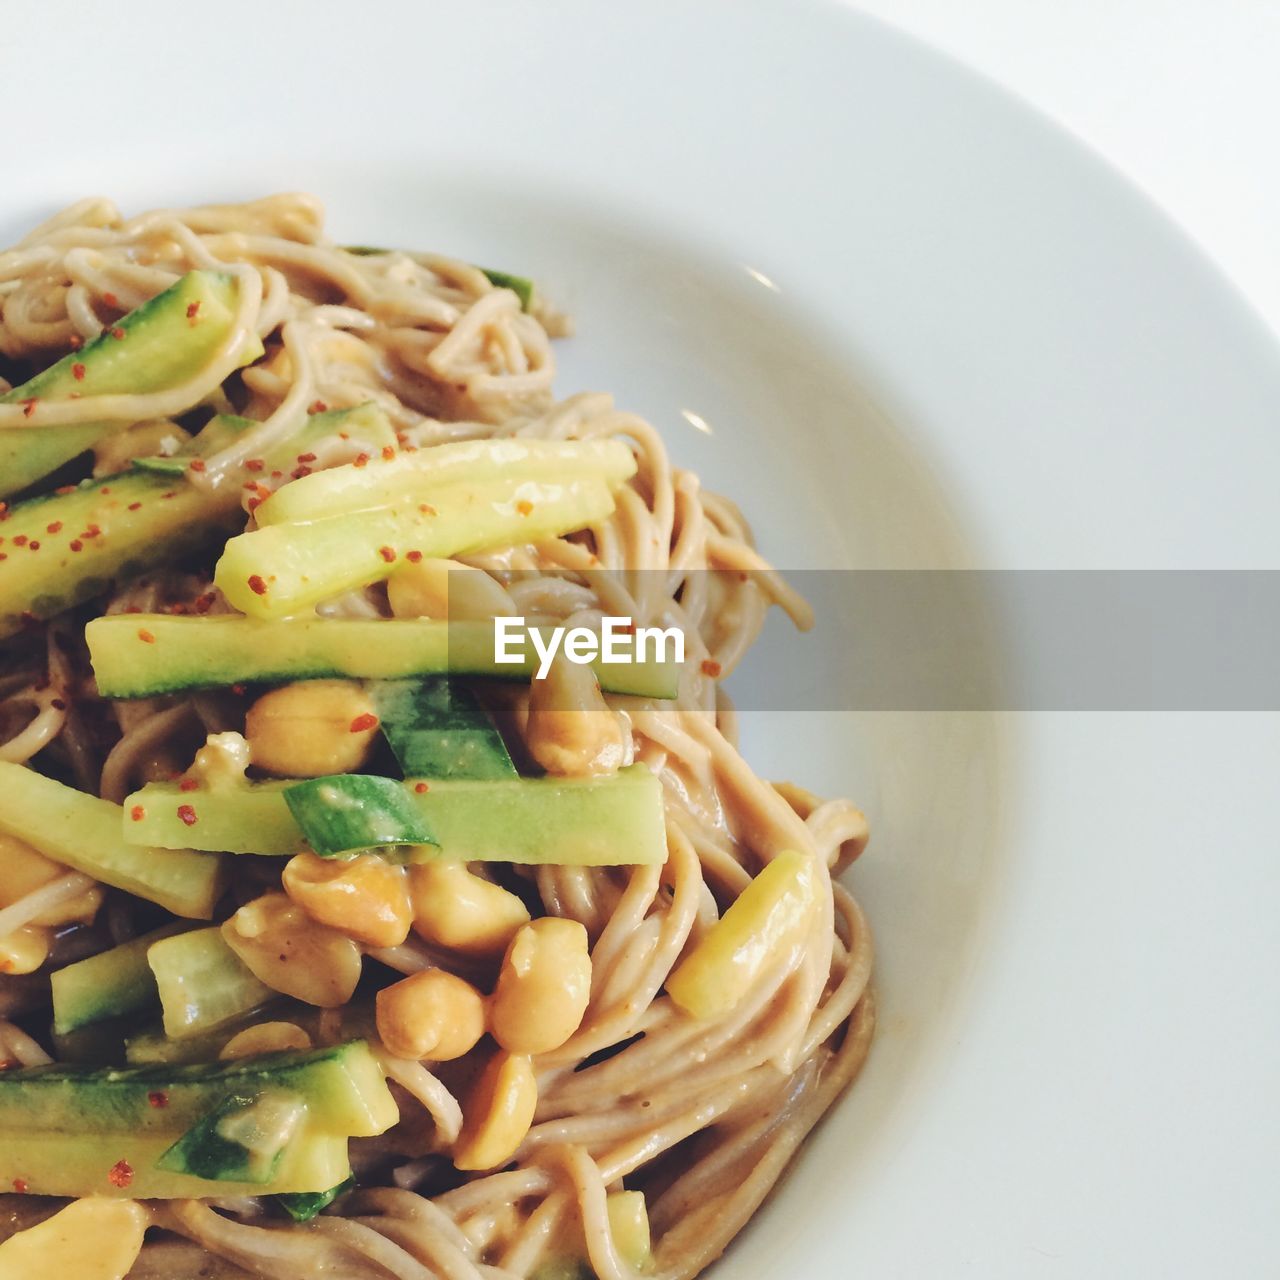 Pasta dish with vegetables on a white plate